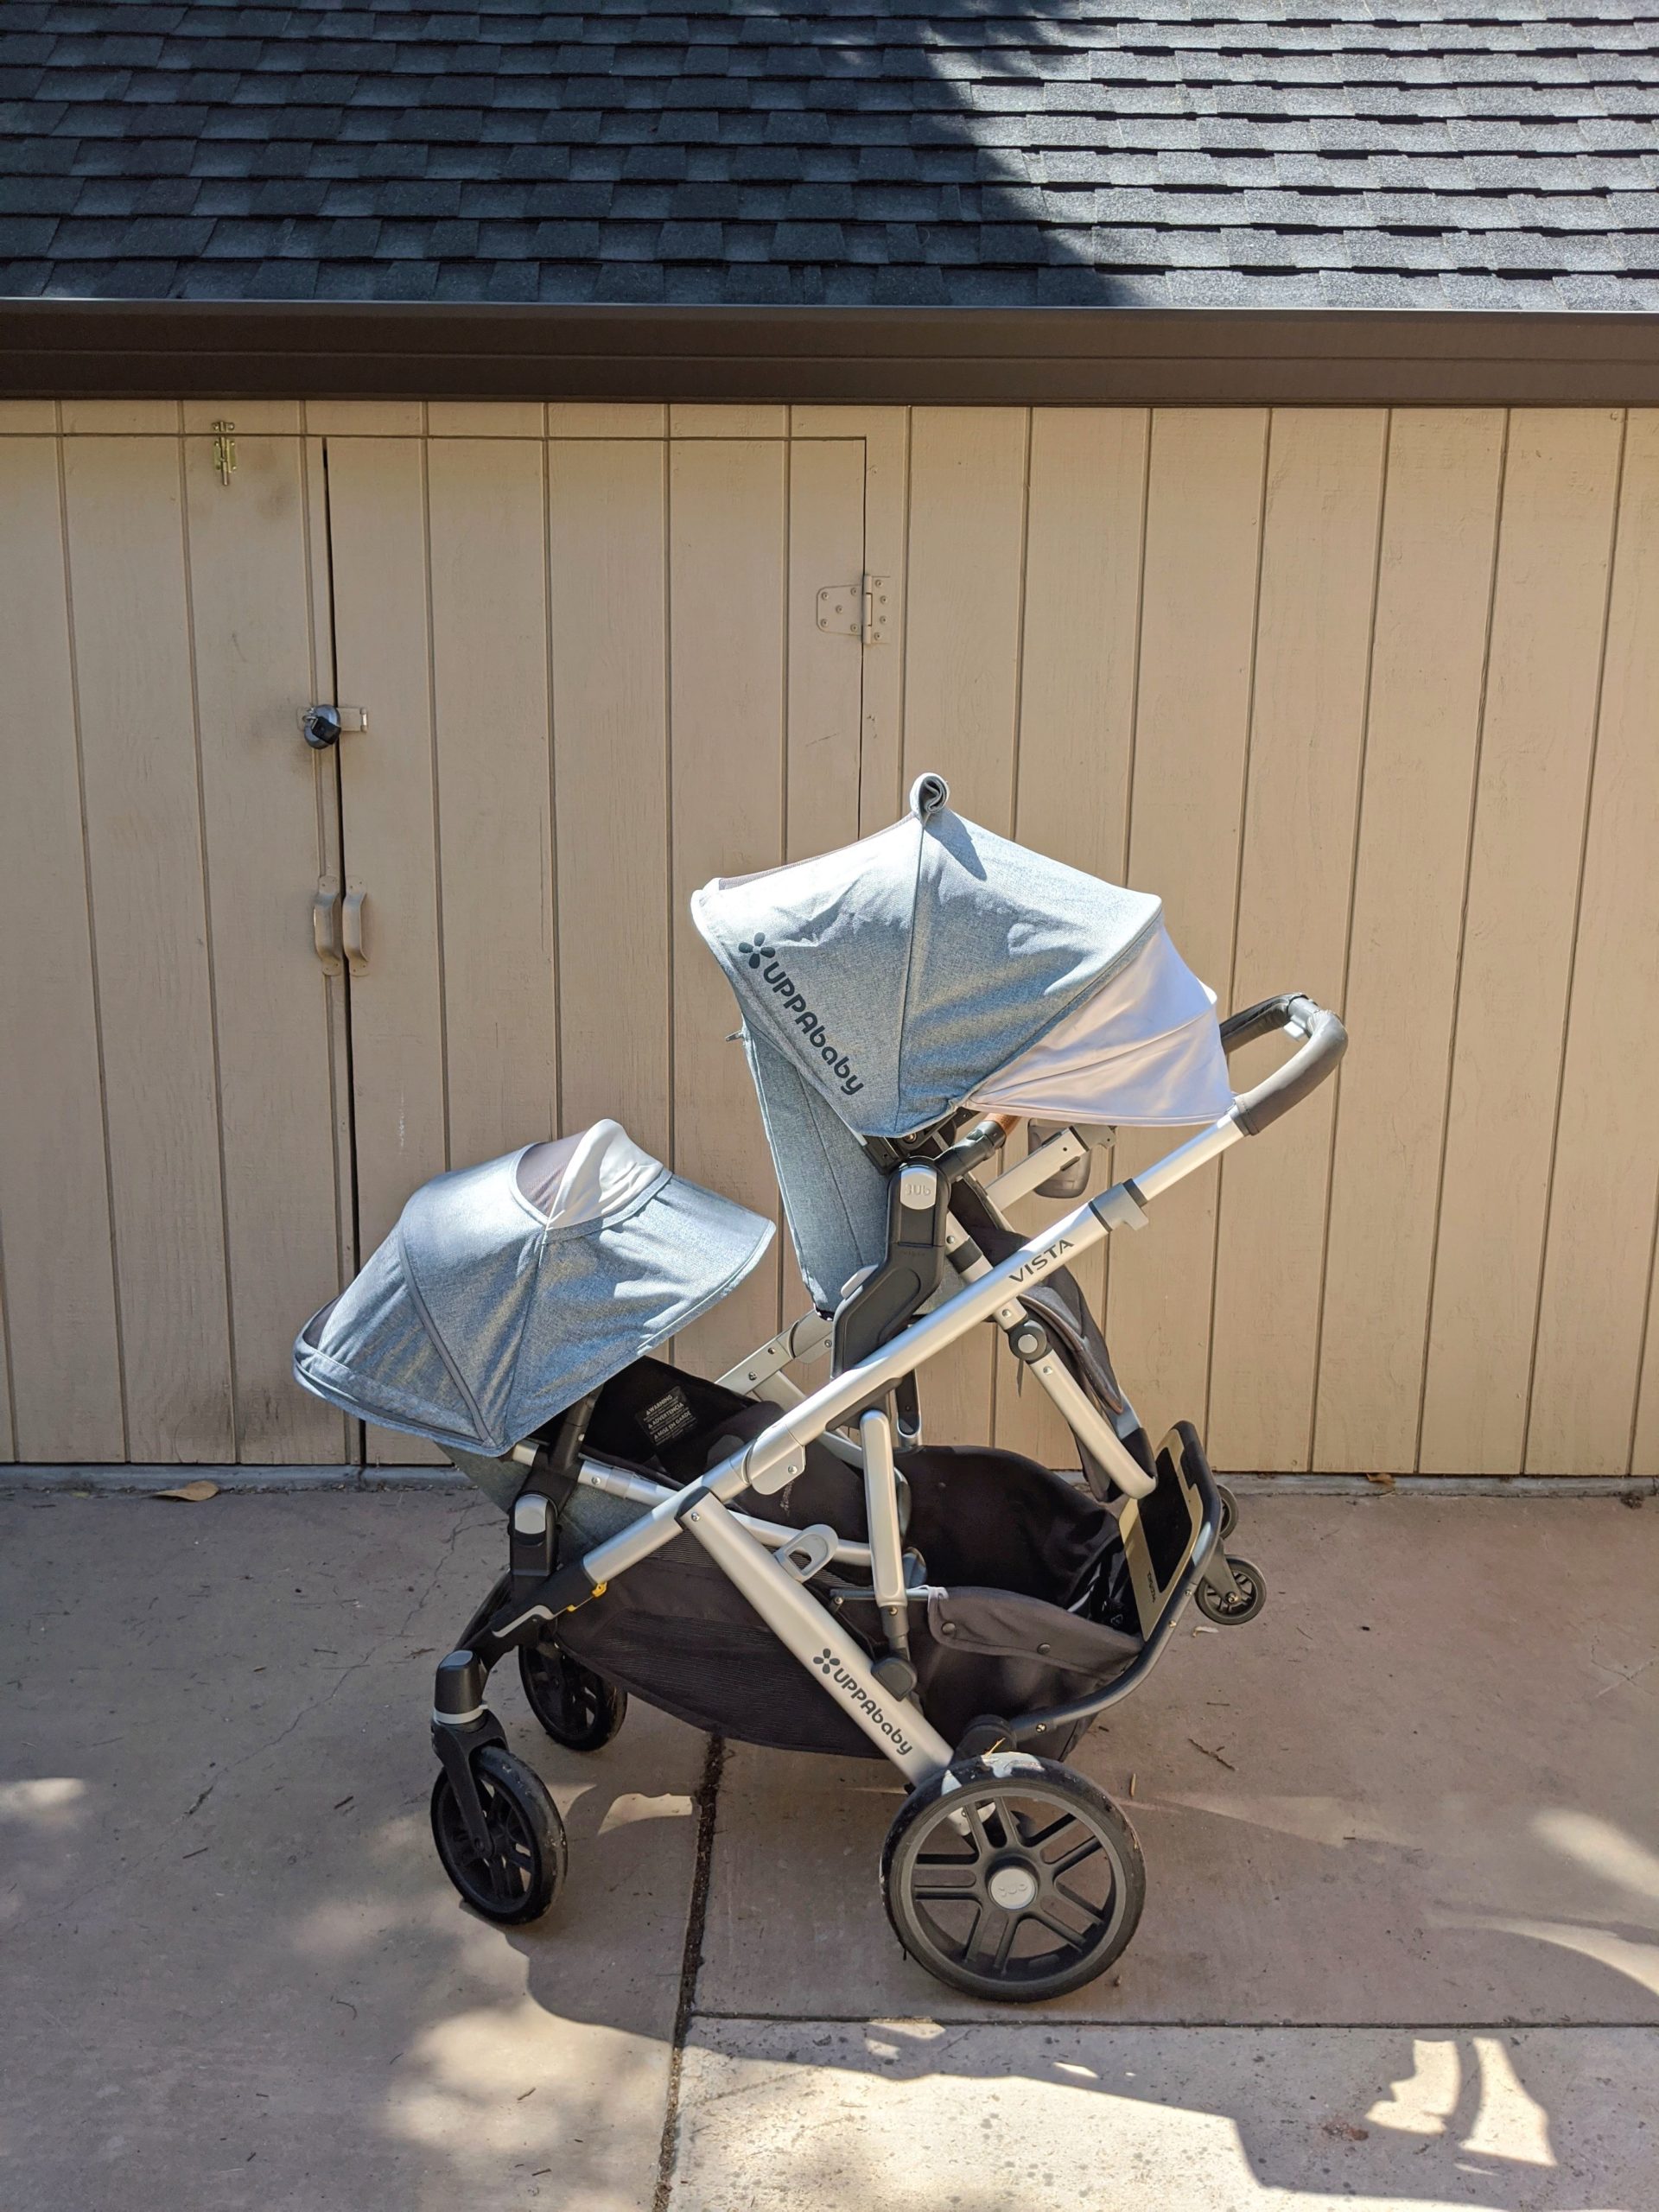 uppababy rumble seat weight limit